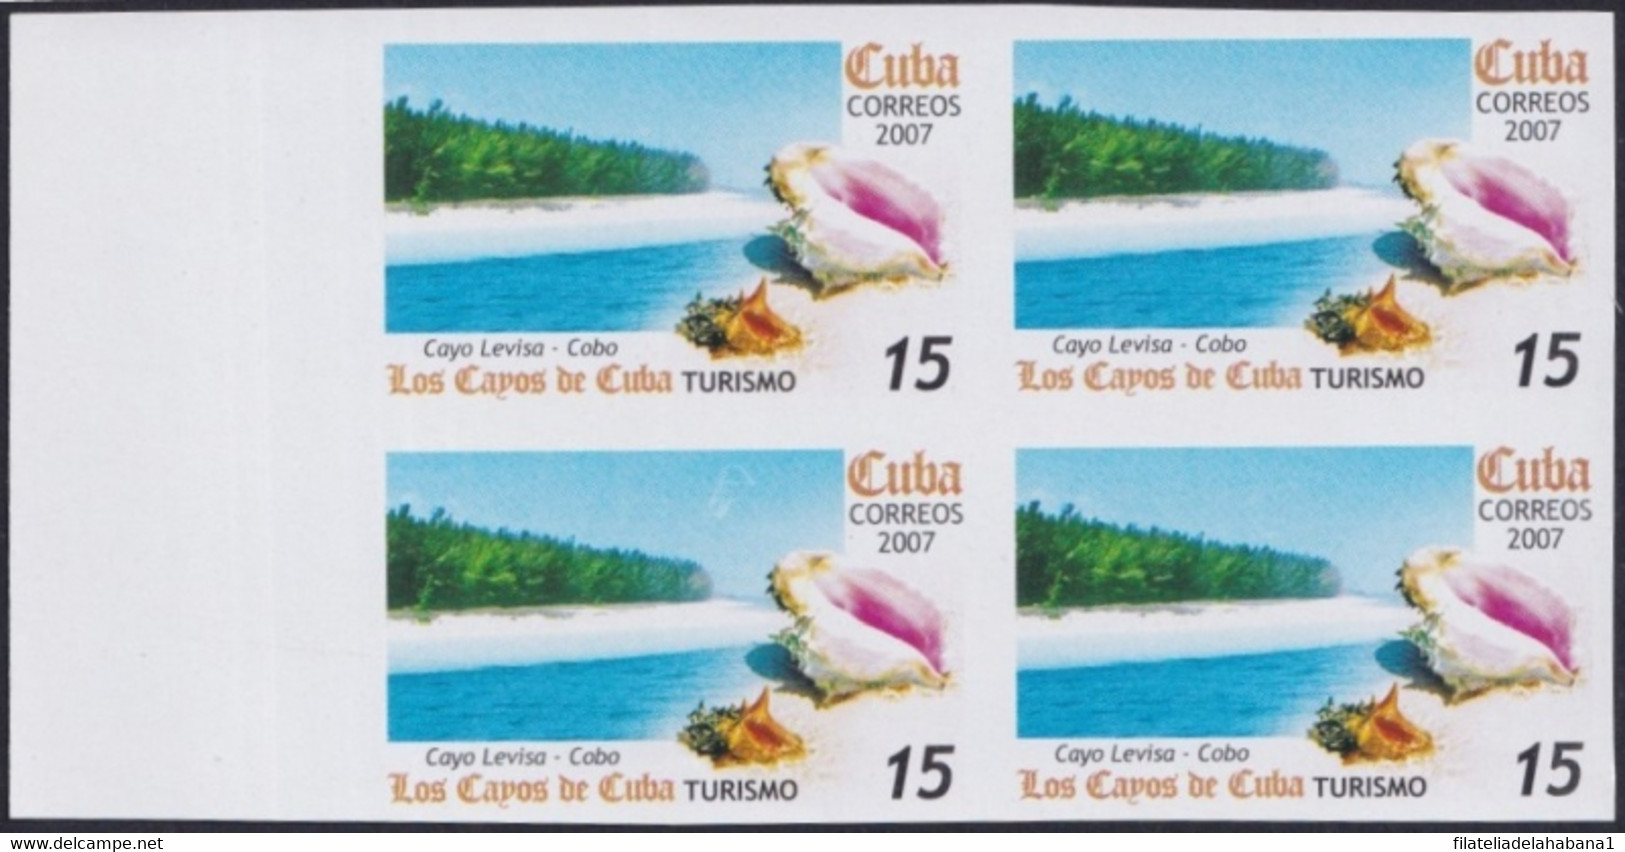 2007.703 CUBA 2007 15c MNH IMPERFORATED PROOF VIRGEN KEY FAUNA SHELL COBO. - Imperforates, Proofs & Errors